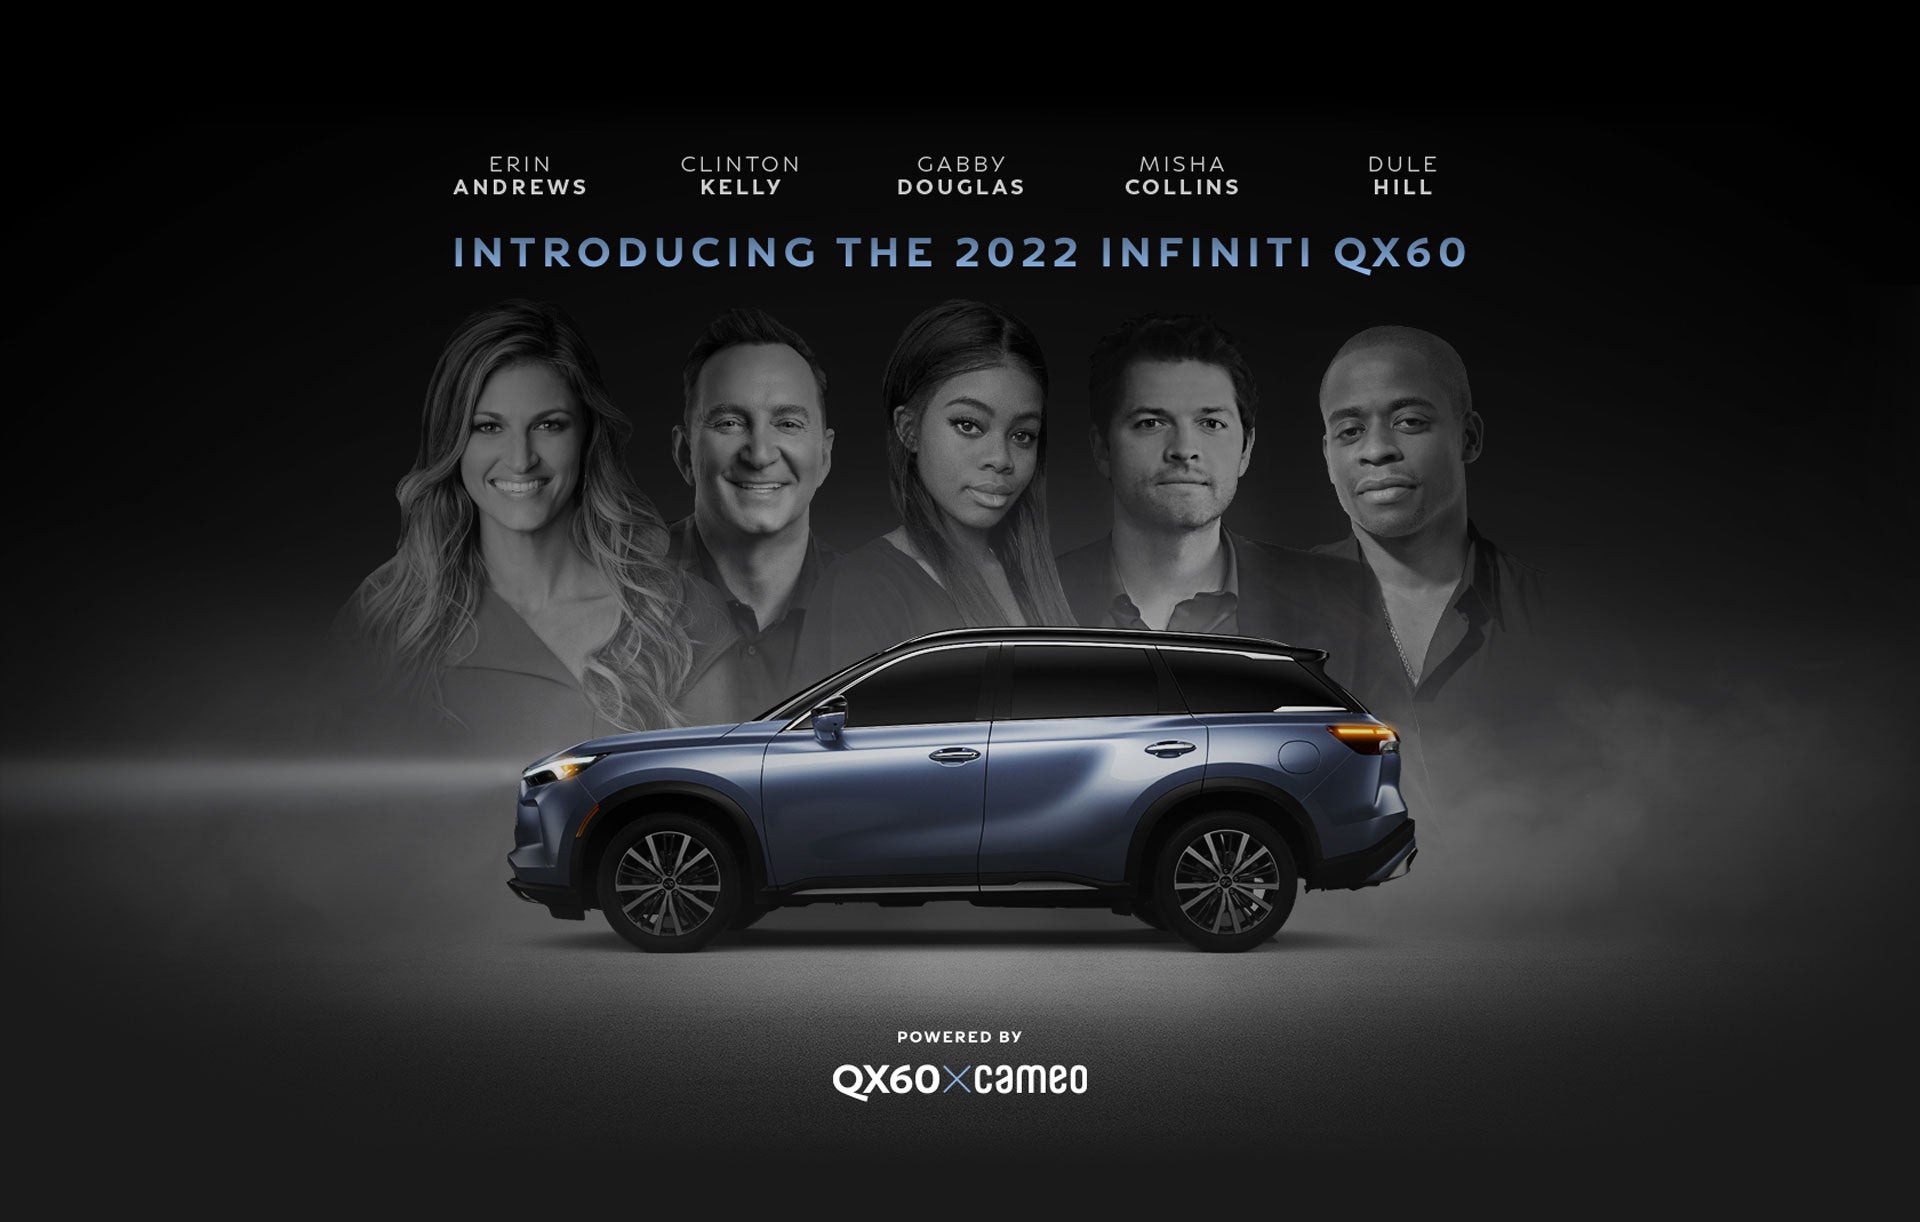 Introducing the new 2022 INFINITI QX60. Learn more about the QX60 from celebrities like Erin Andrews, Clinton Kelly, Gabby Douglas, Misha Collins, and Dule Hill, powered by QX60 x Cameo.